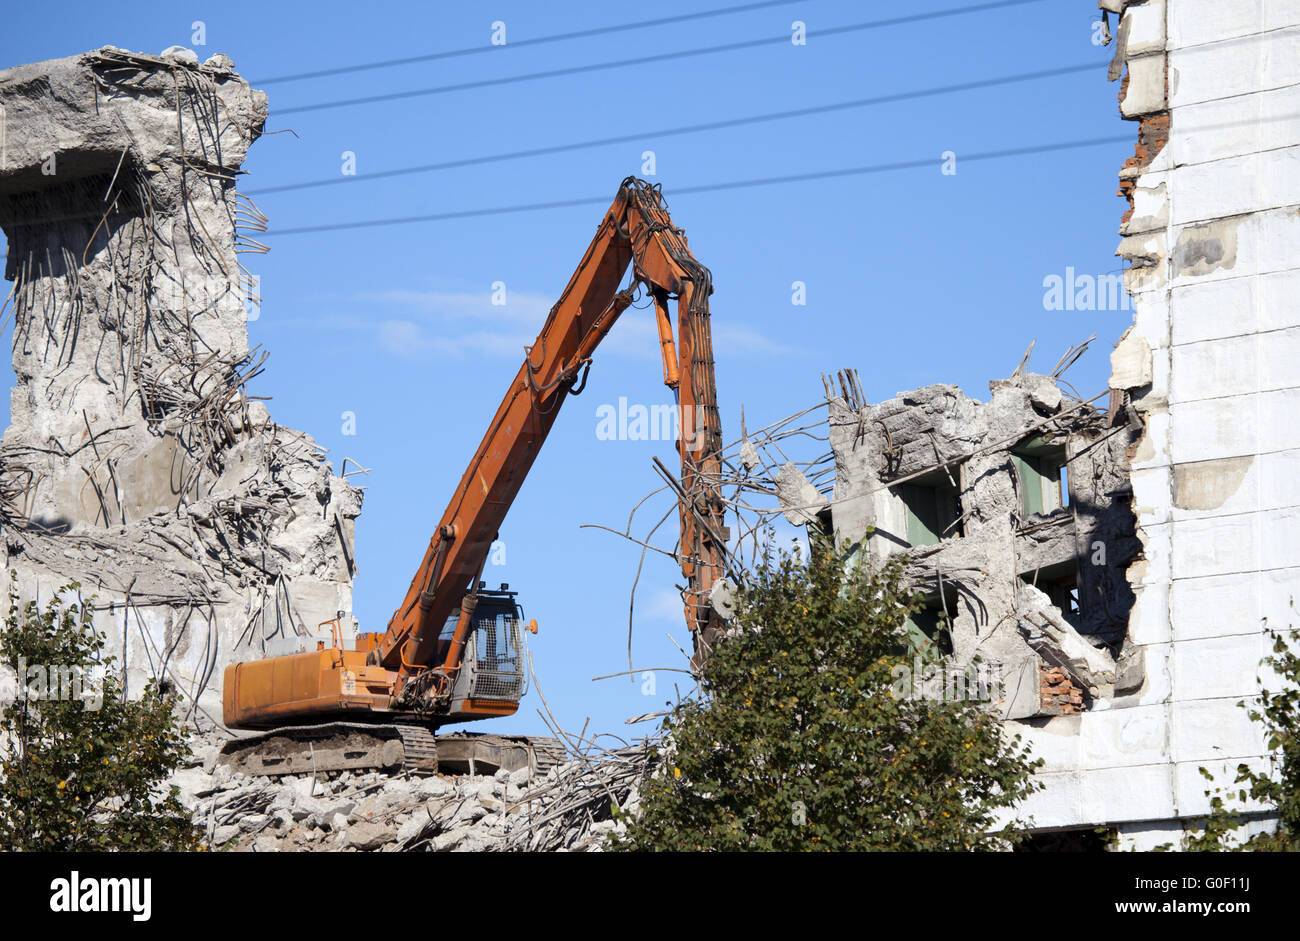 The dredge destroys an old building Stock Photo